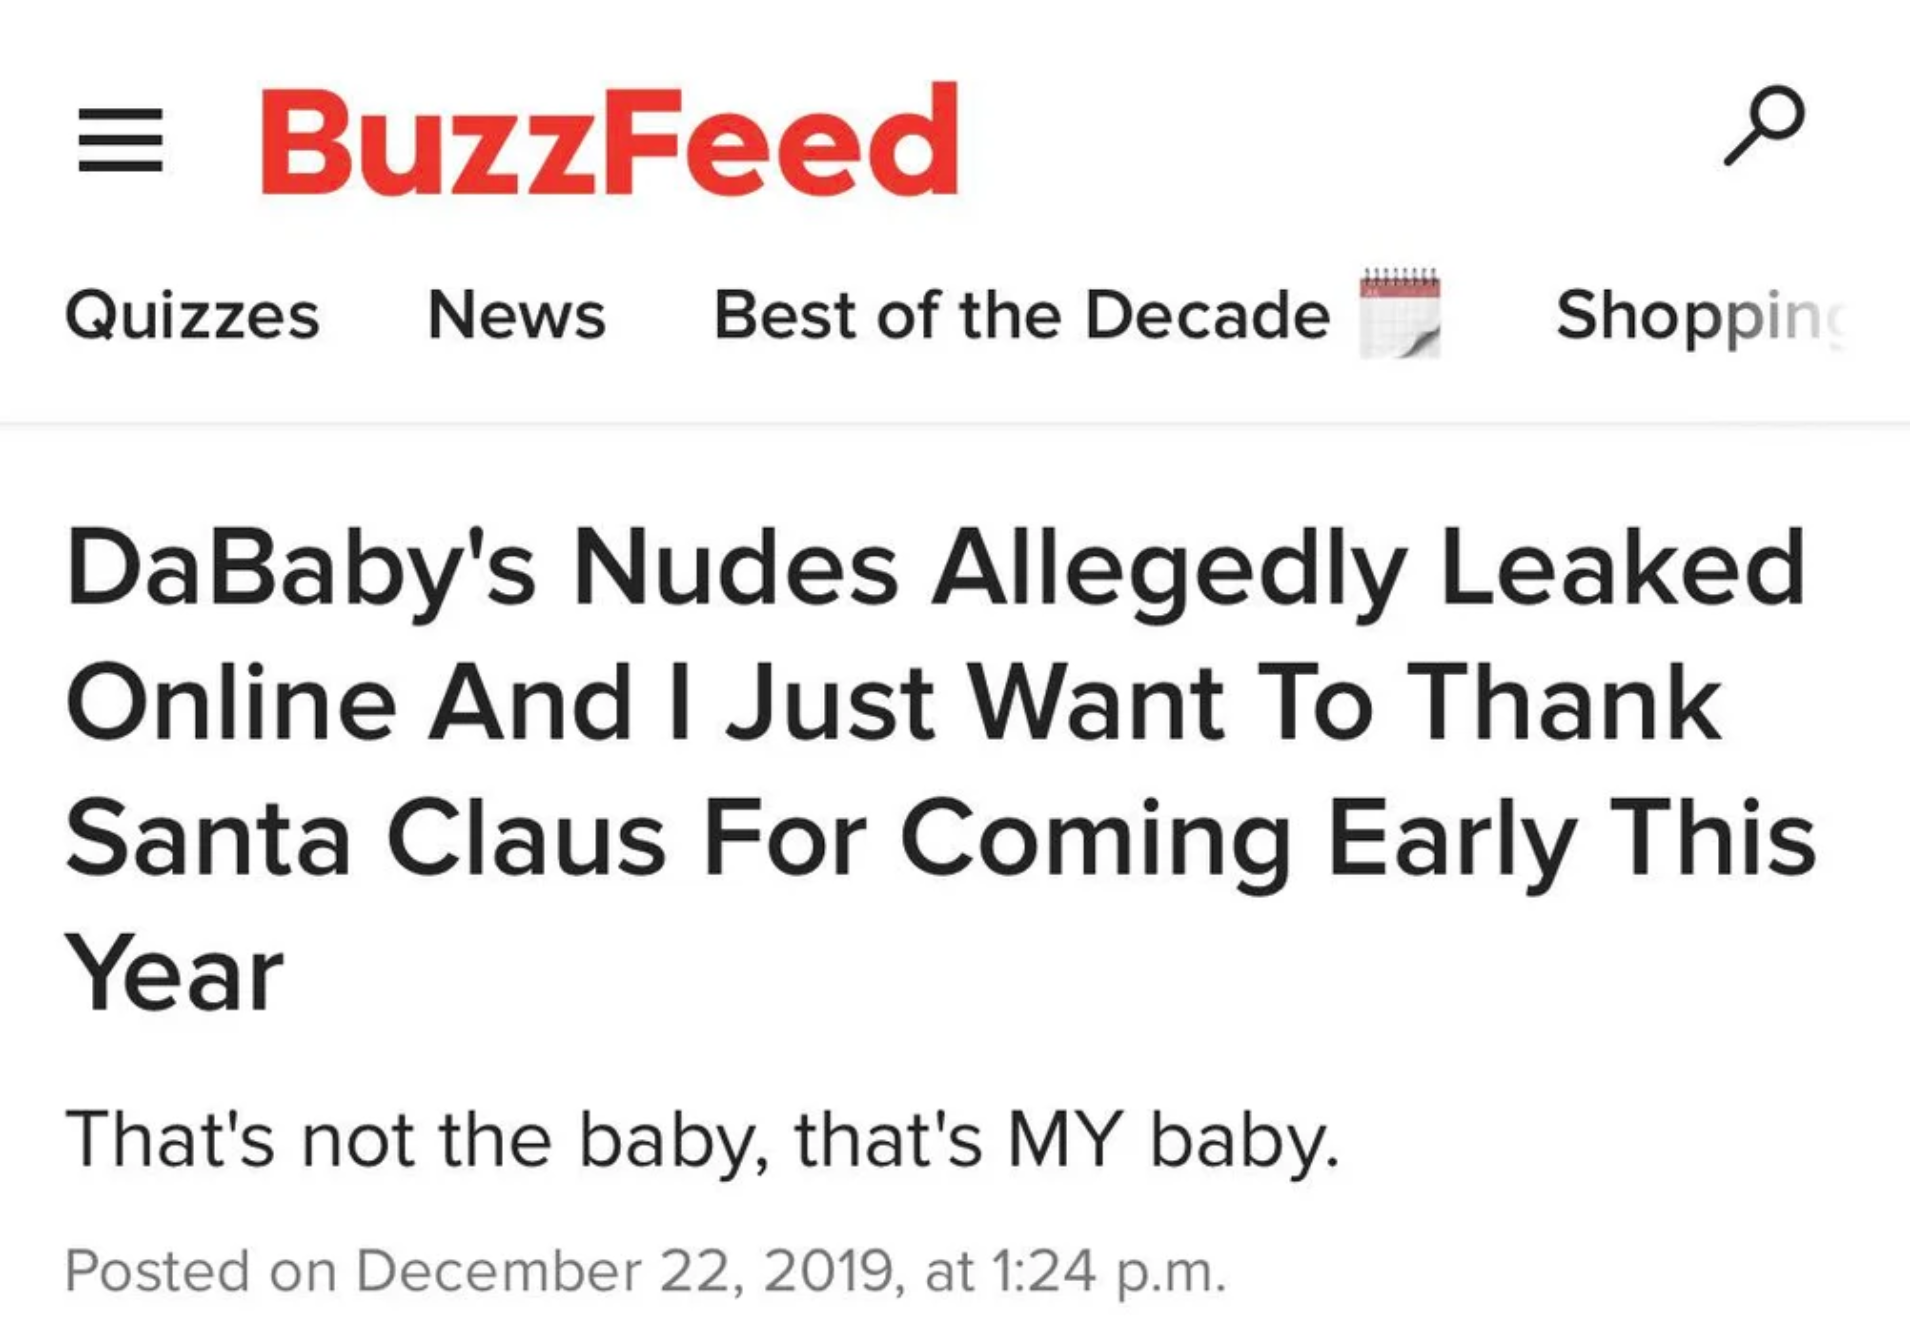 document - BuzzFeed Quizzes News Best of the Decade Shopping DaBaby's Nudes Allegedly Leaked Online And I Just Want To Thank Santa Claus For Coming Early This Year That's not the baby, that's My baby. Posted on , at p.m.